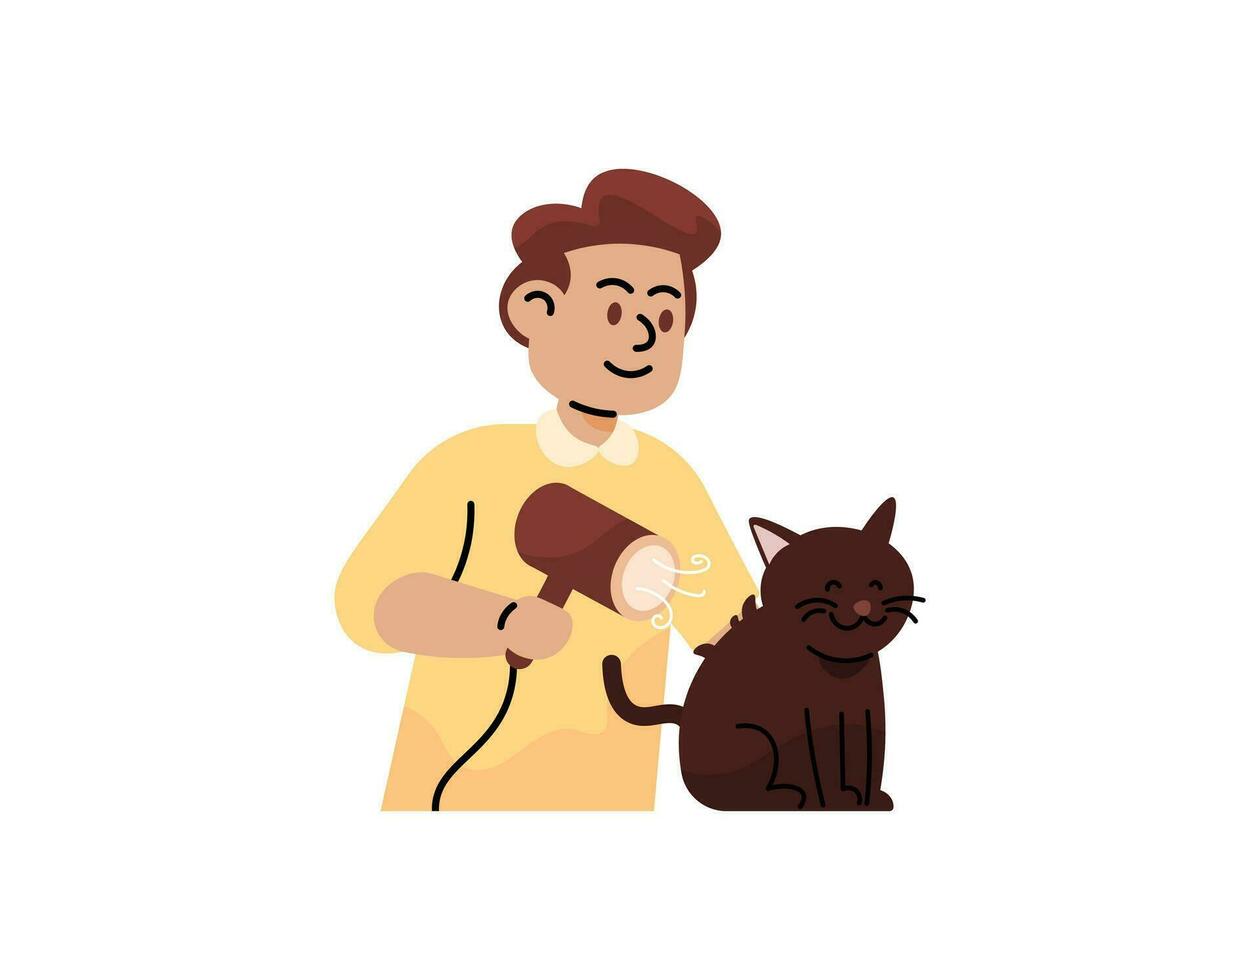 an illustration of a man using a hair dryer to dry a cat's fur. dry the cat's fur that is wet from bathing. warm the cat. caring for pets. flat illustration design. graphic elements. vector